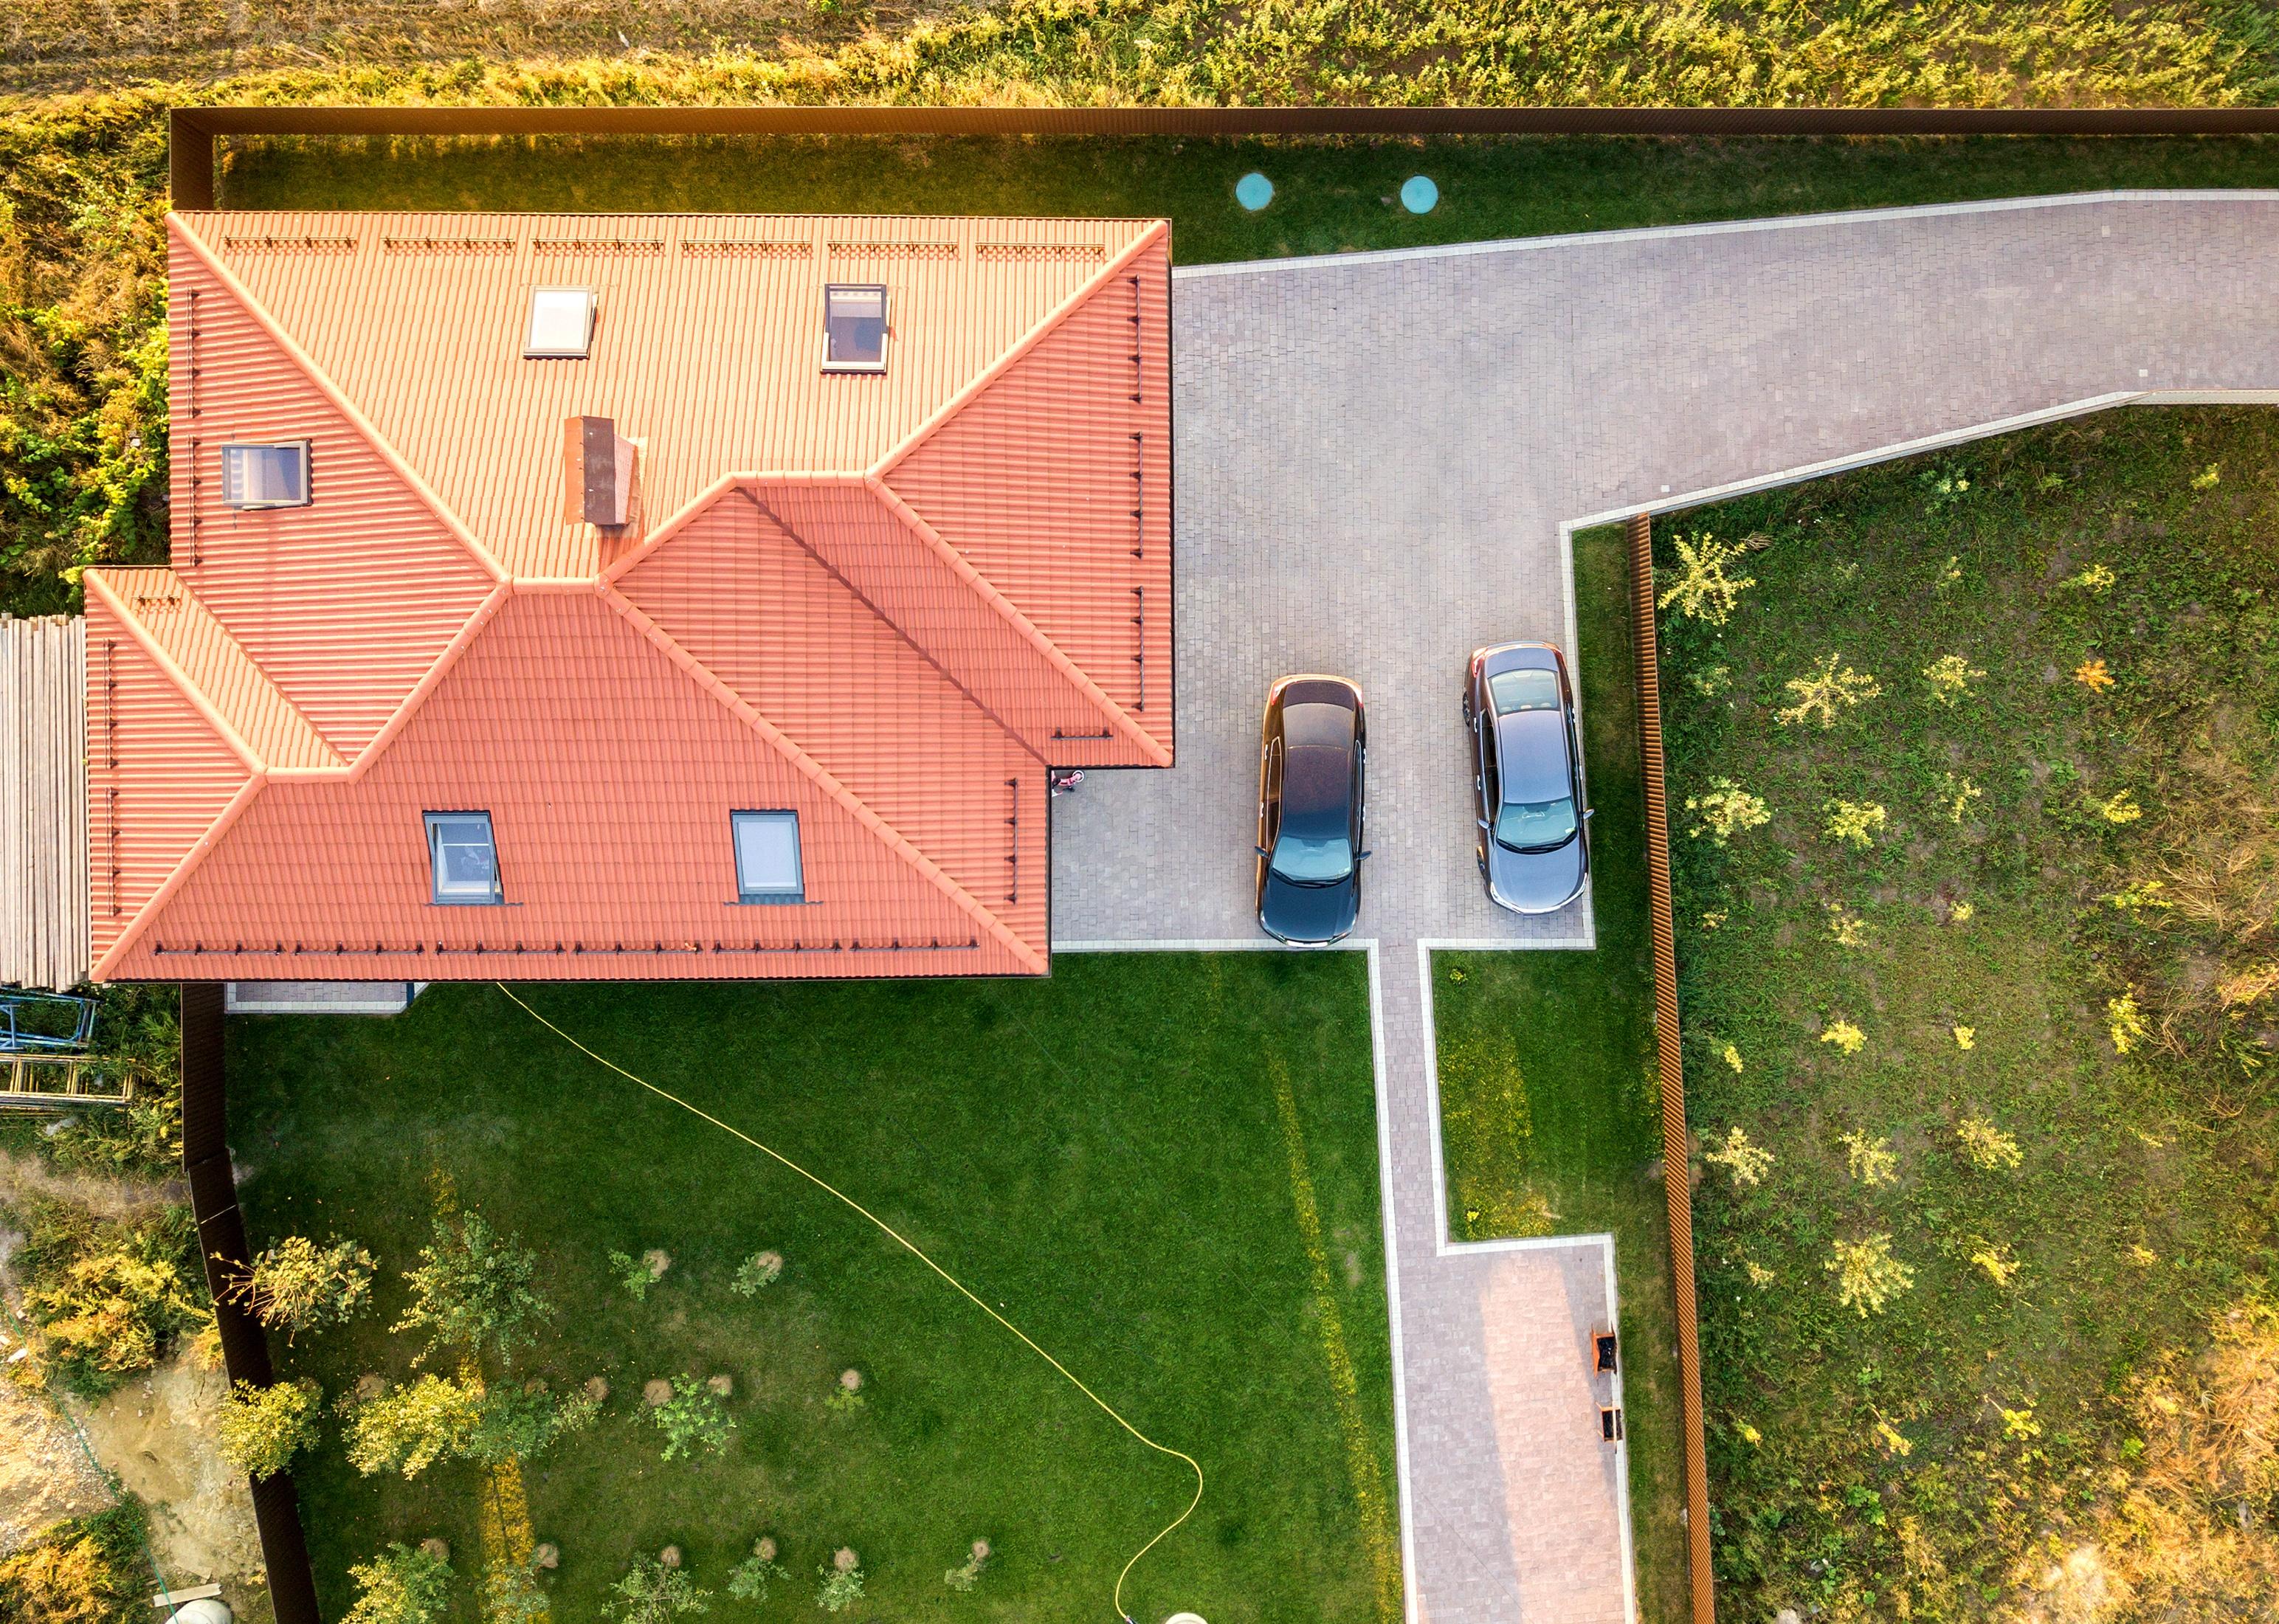 Top-down aerial view of a house with red roof and yard with two parked new cars.